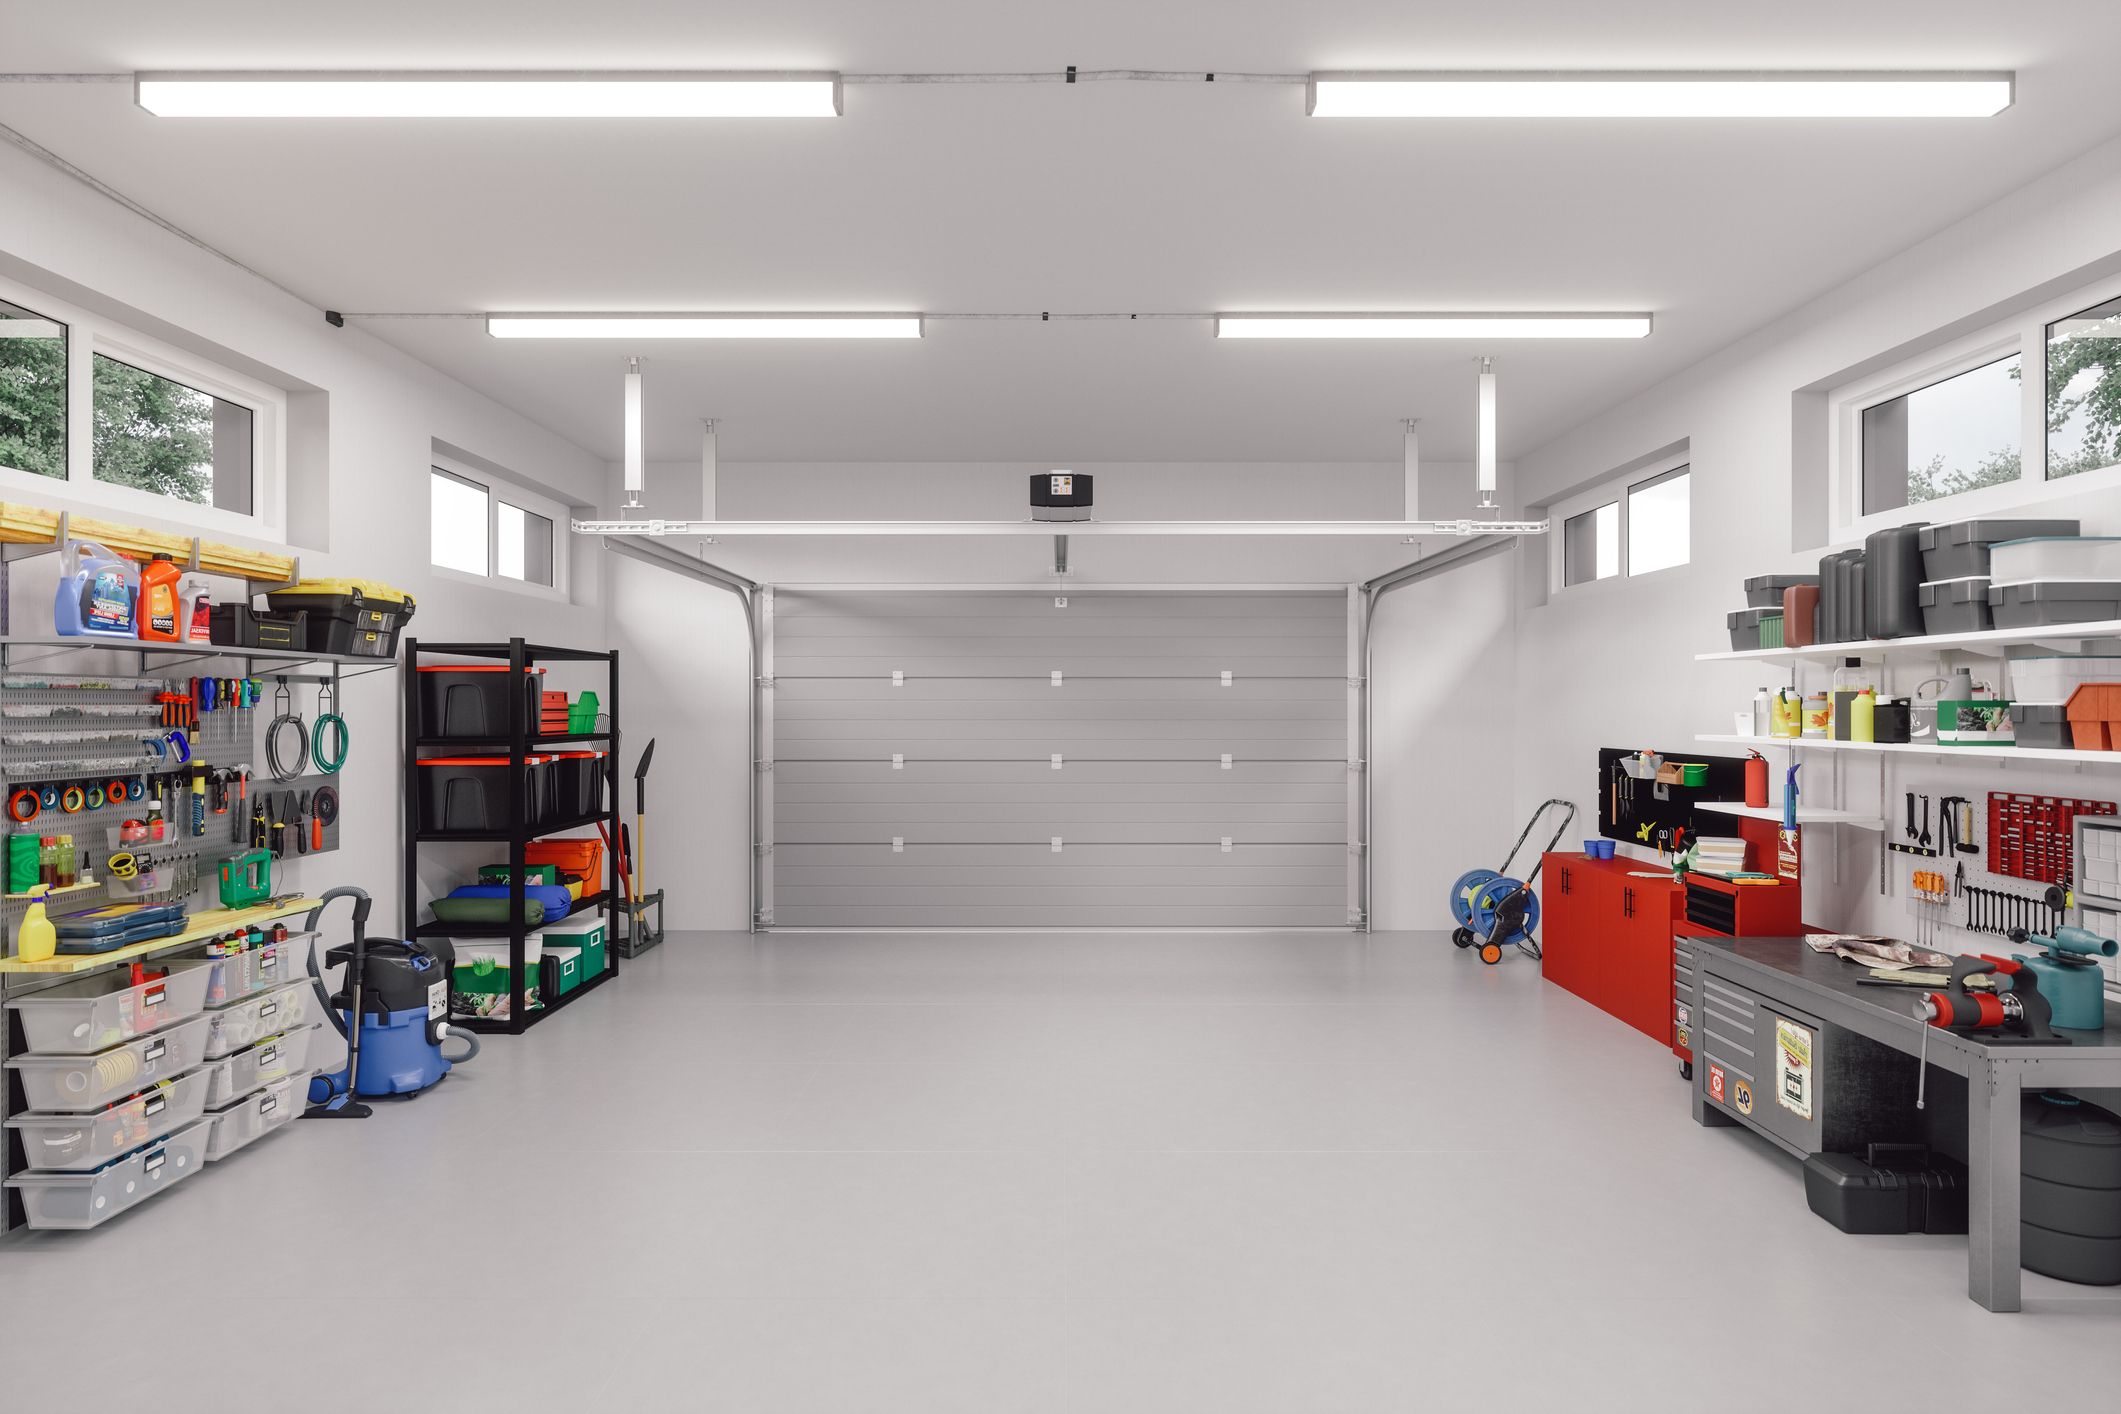 30 Best Garage Organizing Ideas to Make the Most of Storage Space